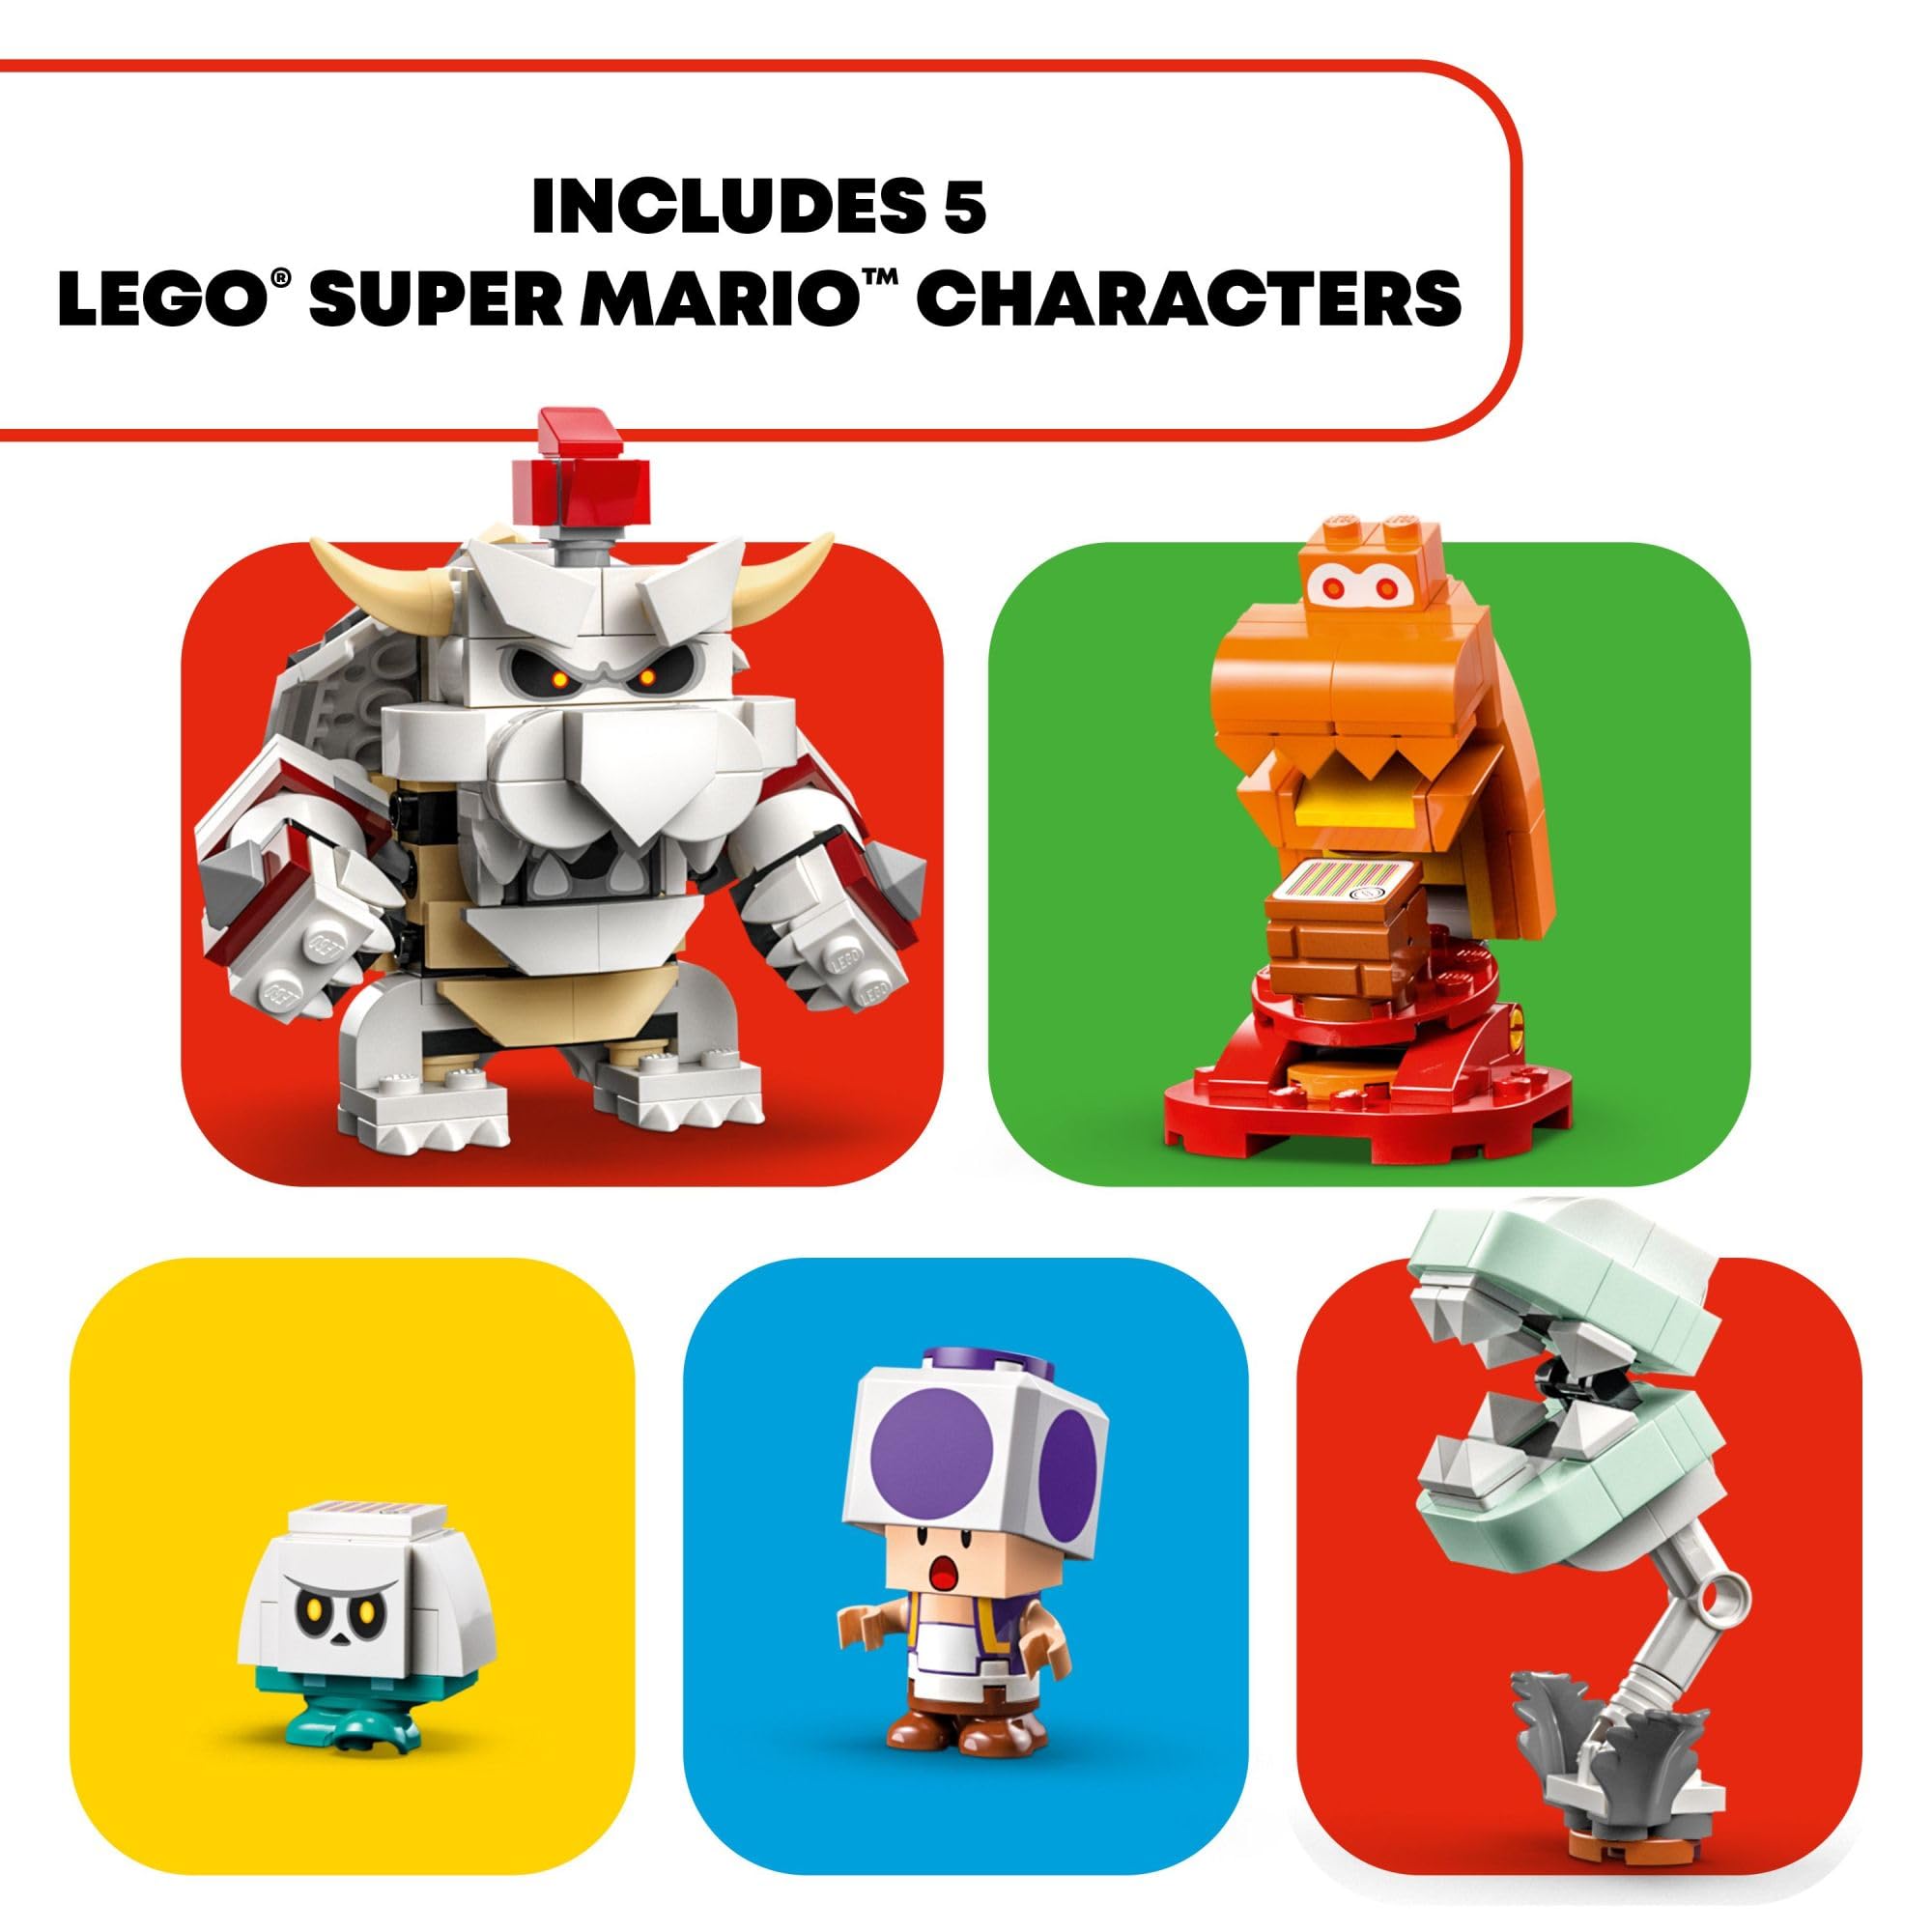 LEGO Super Mario Dry Bowser Castle Battle Expansion Set 71423, Buildable Game with 5 Super Mario Figures, Collectible Playset to Combine with a Starter Course, Super Mario Gift Set for Kids Ages 8-10